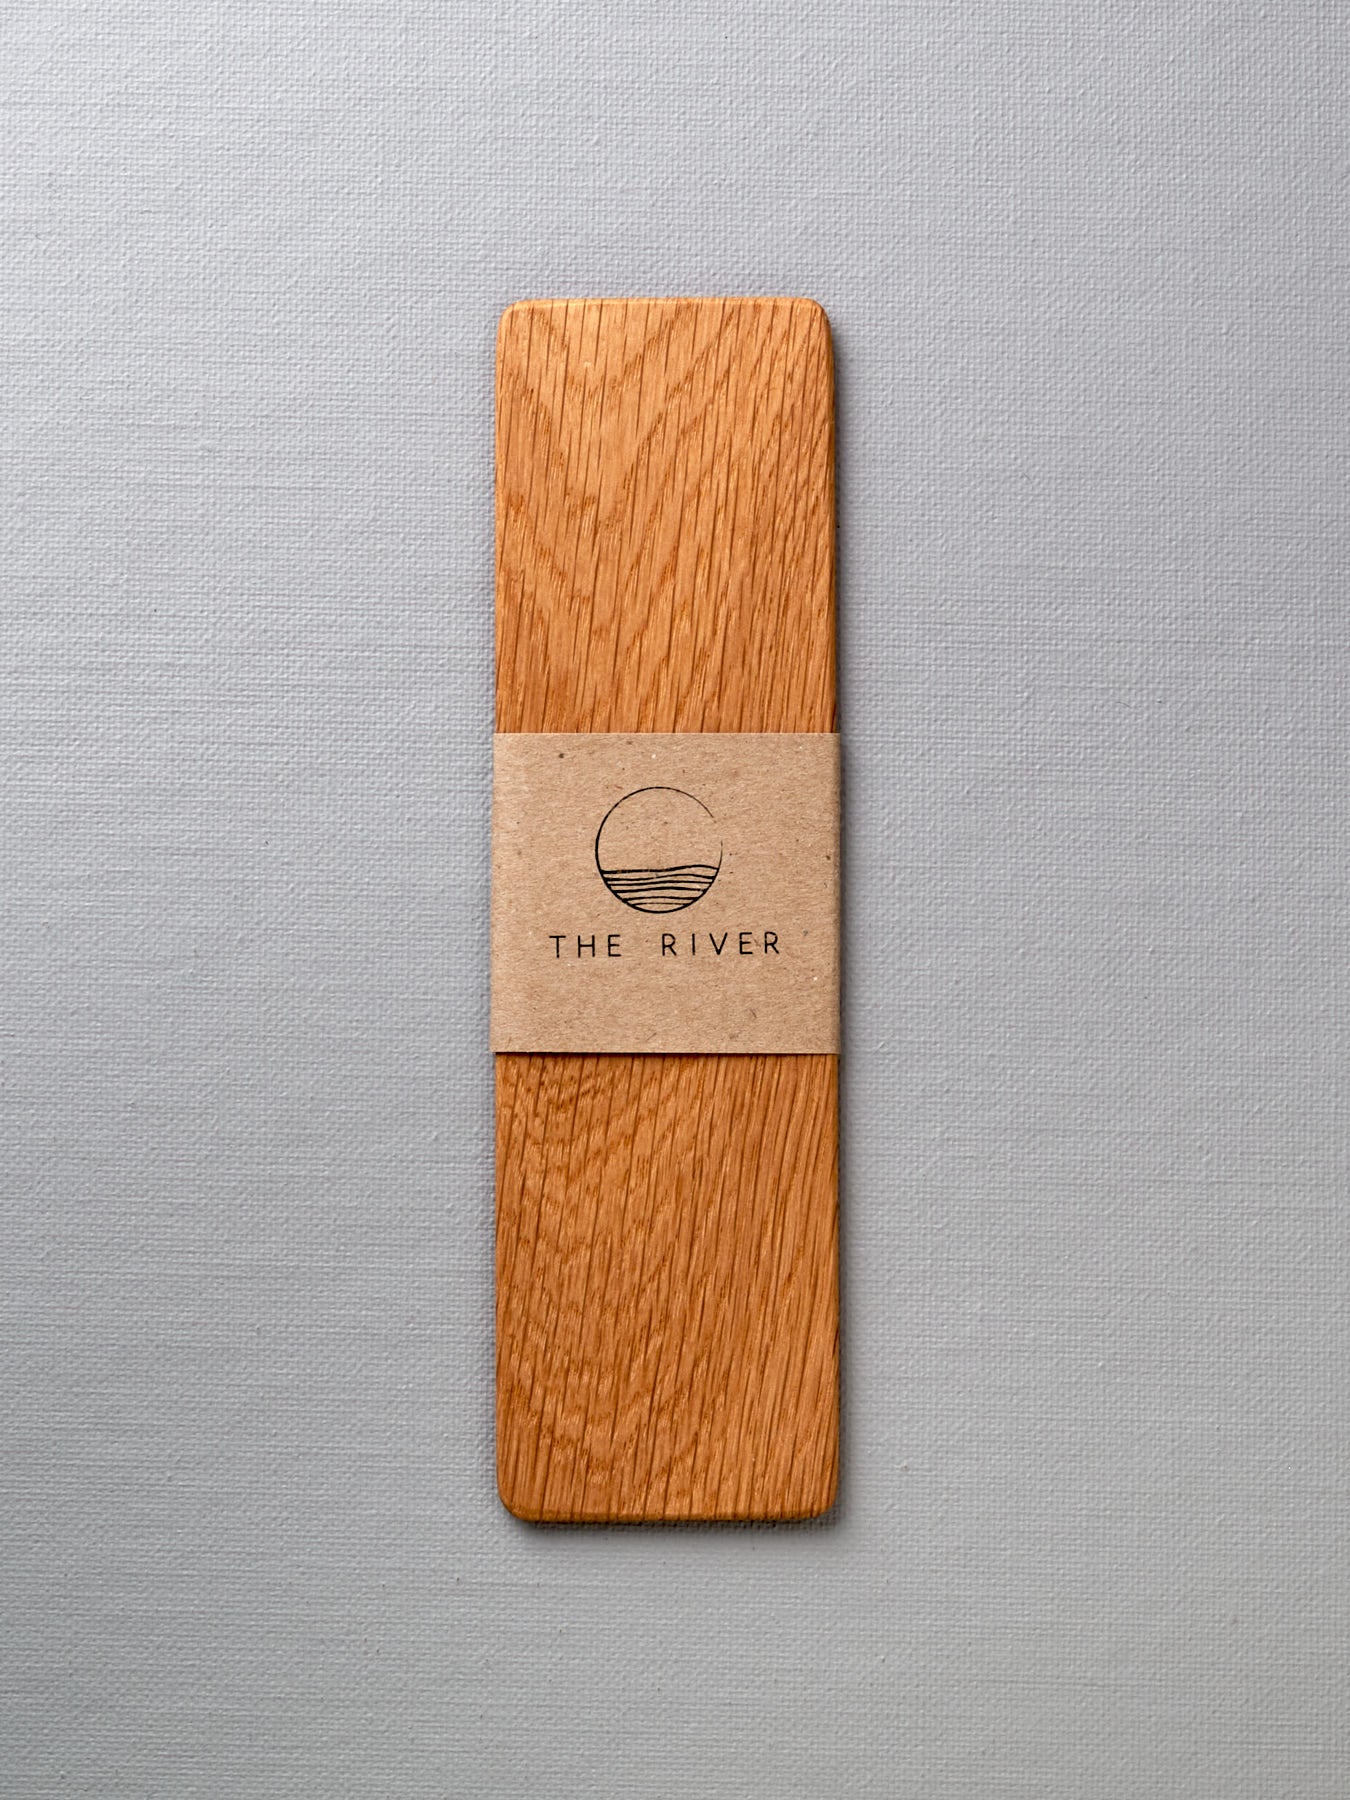 A Bookmark - Oak cutting board with a label on it made by The River.